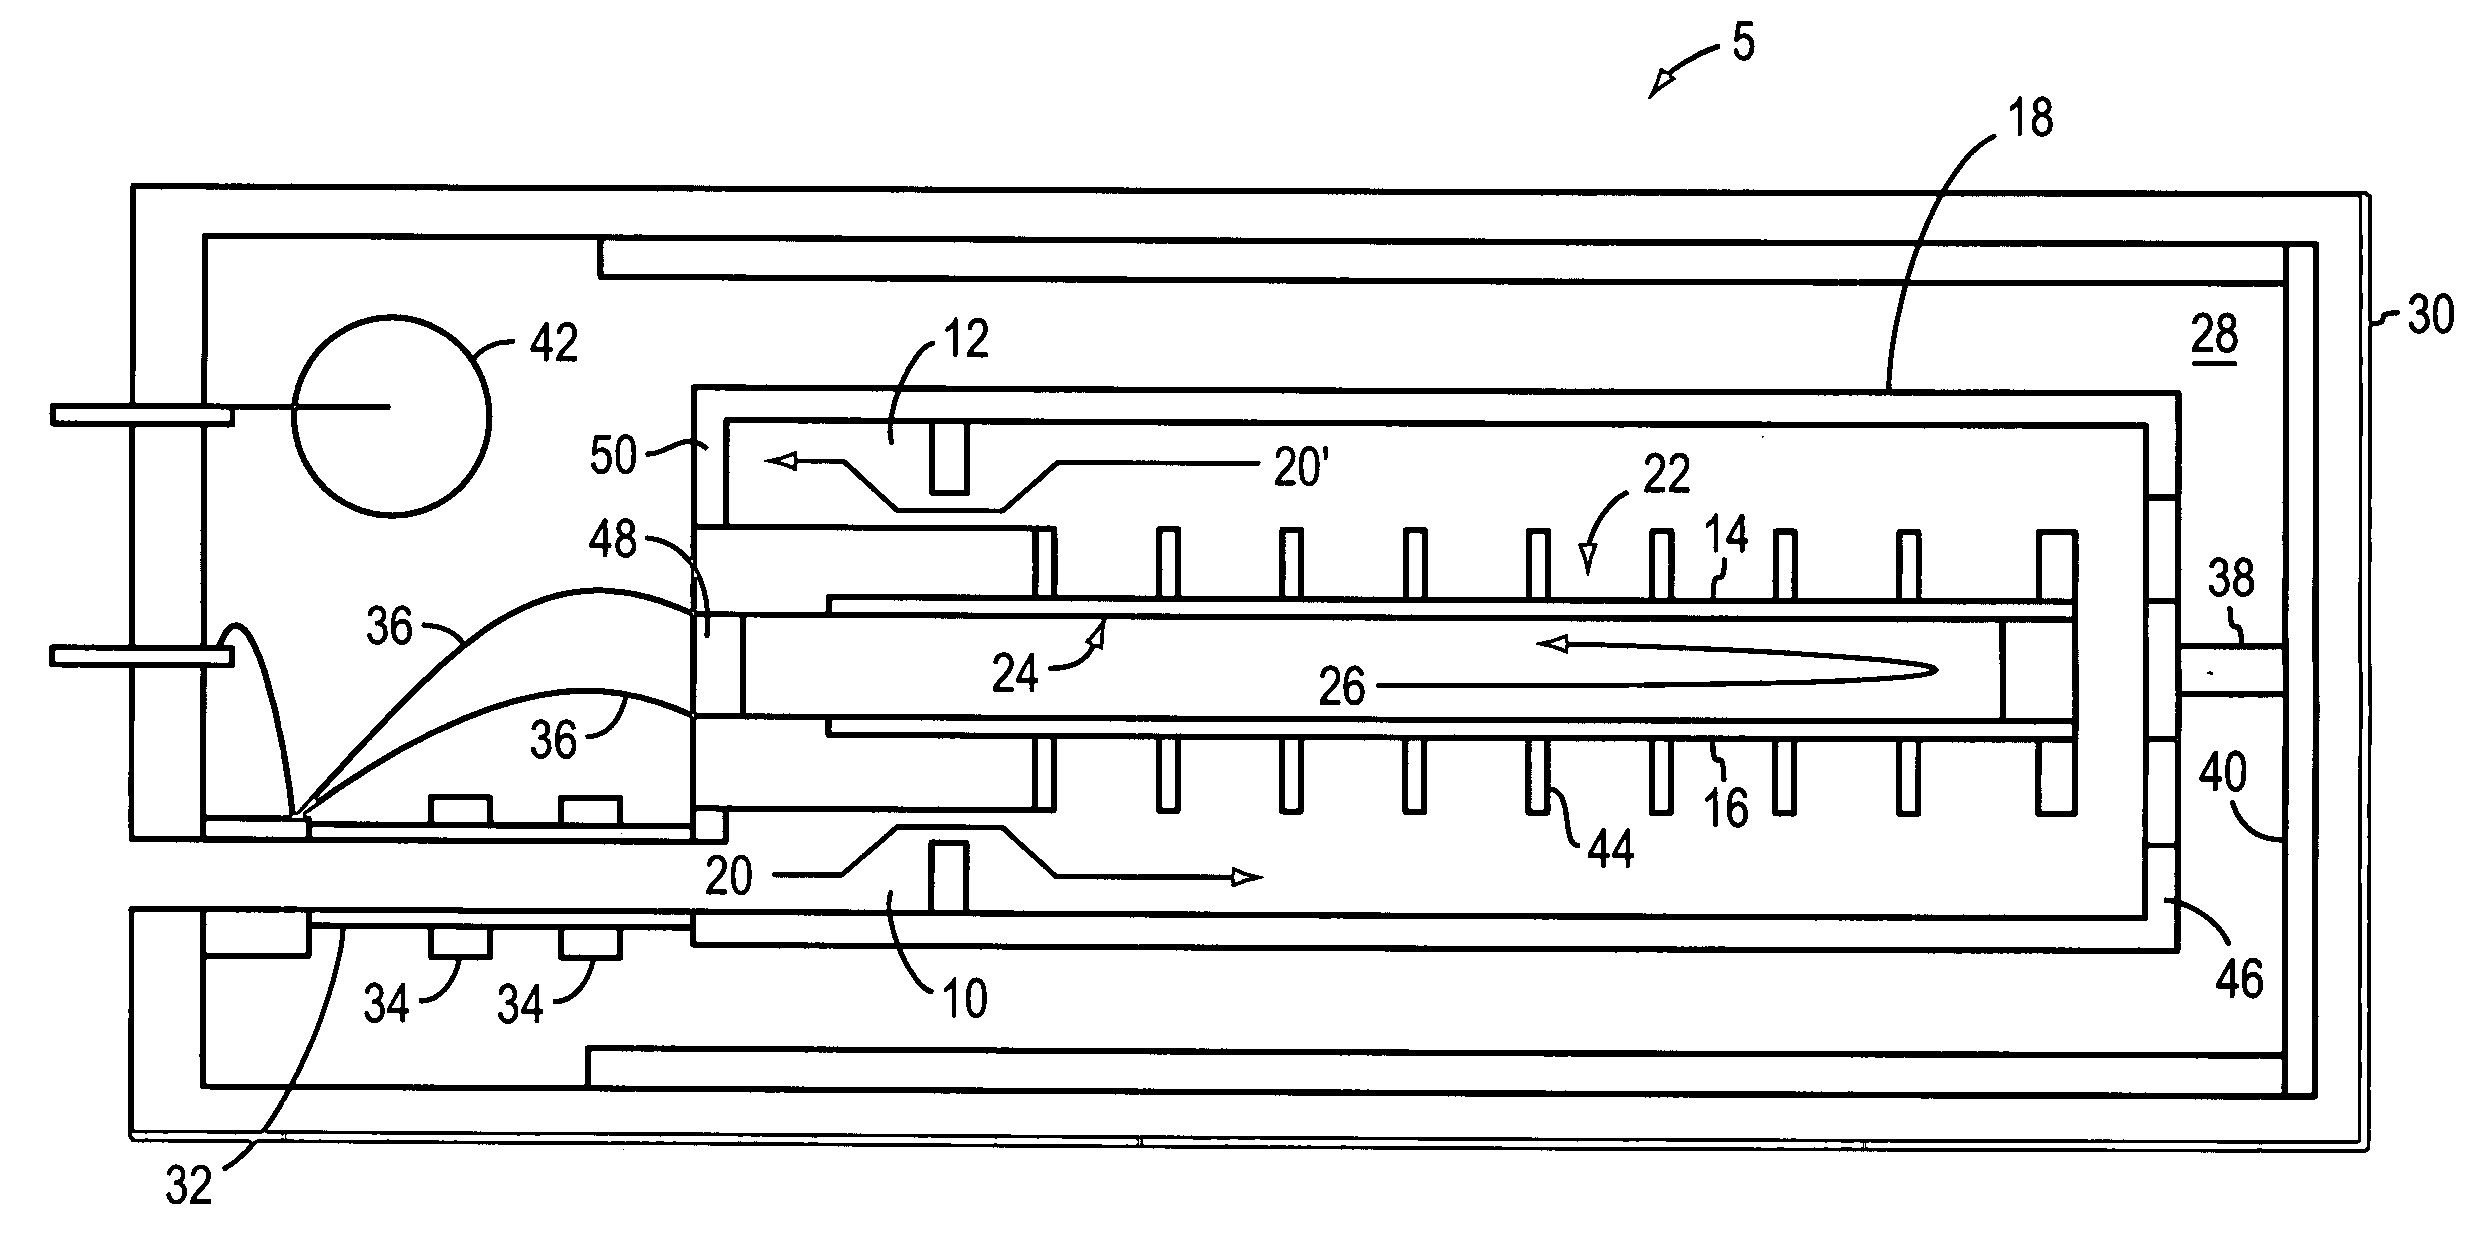 Fuel cell apparatus and methods